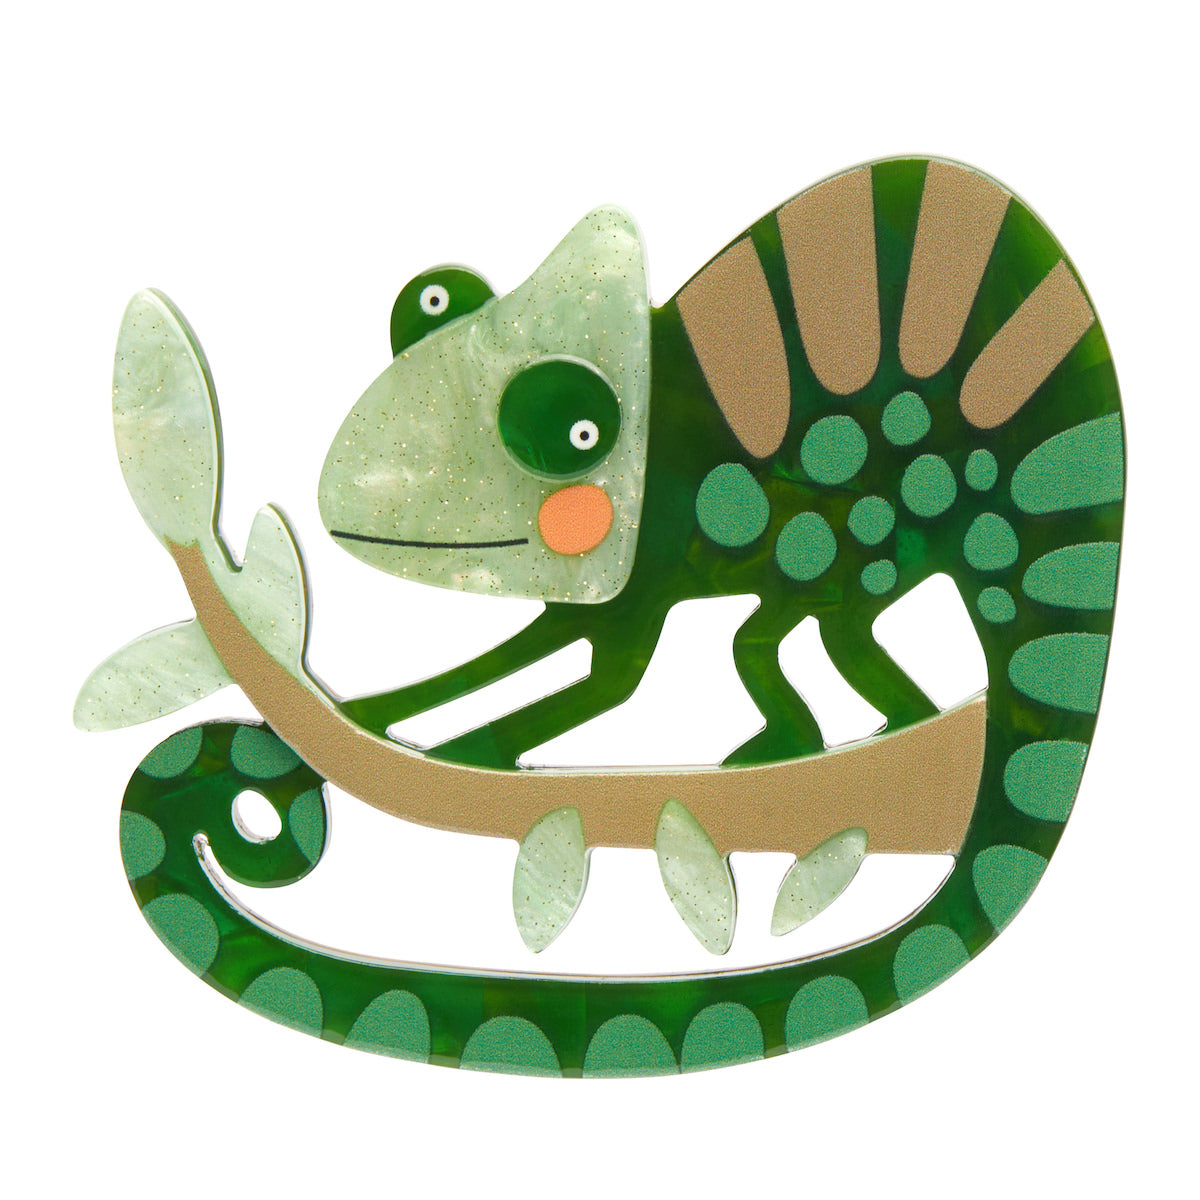 Terry Runyan Collaboration Collection "Good Karma" layered resin green chameleon on branch brooch